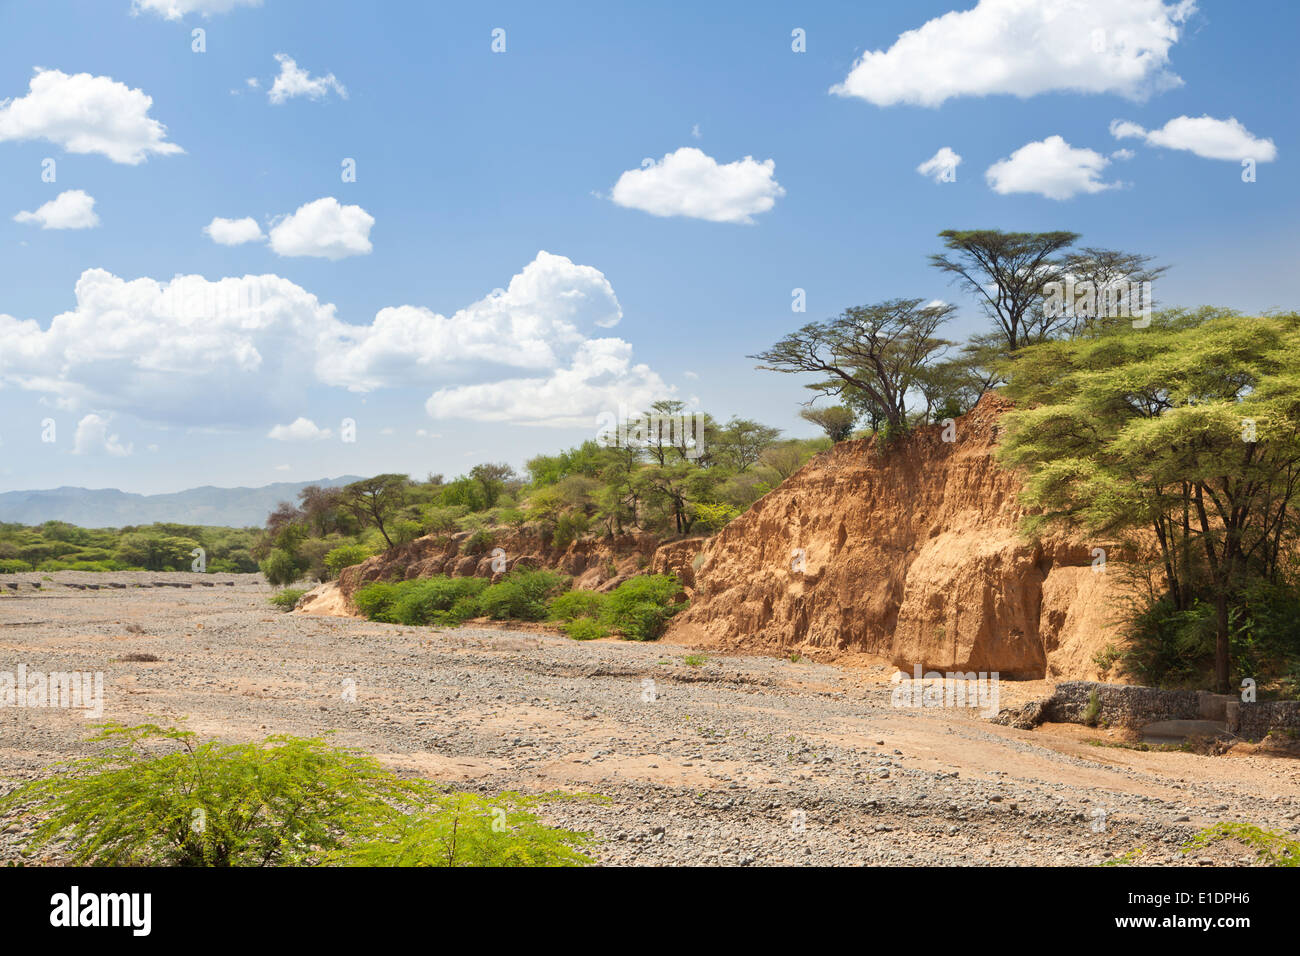 An empty river bed between Marigat and Lake Baringo in Kenya during dry season Stock Photo